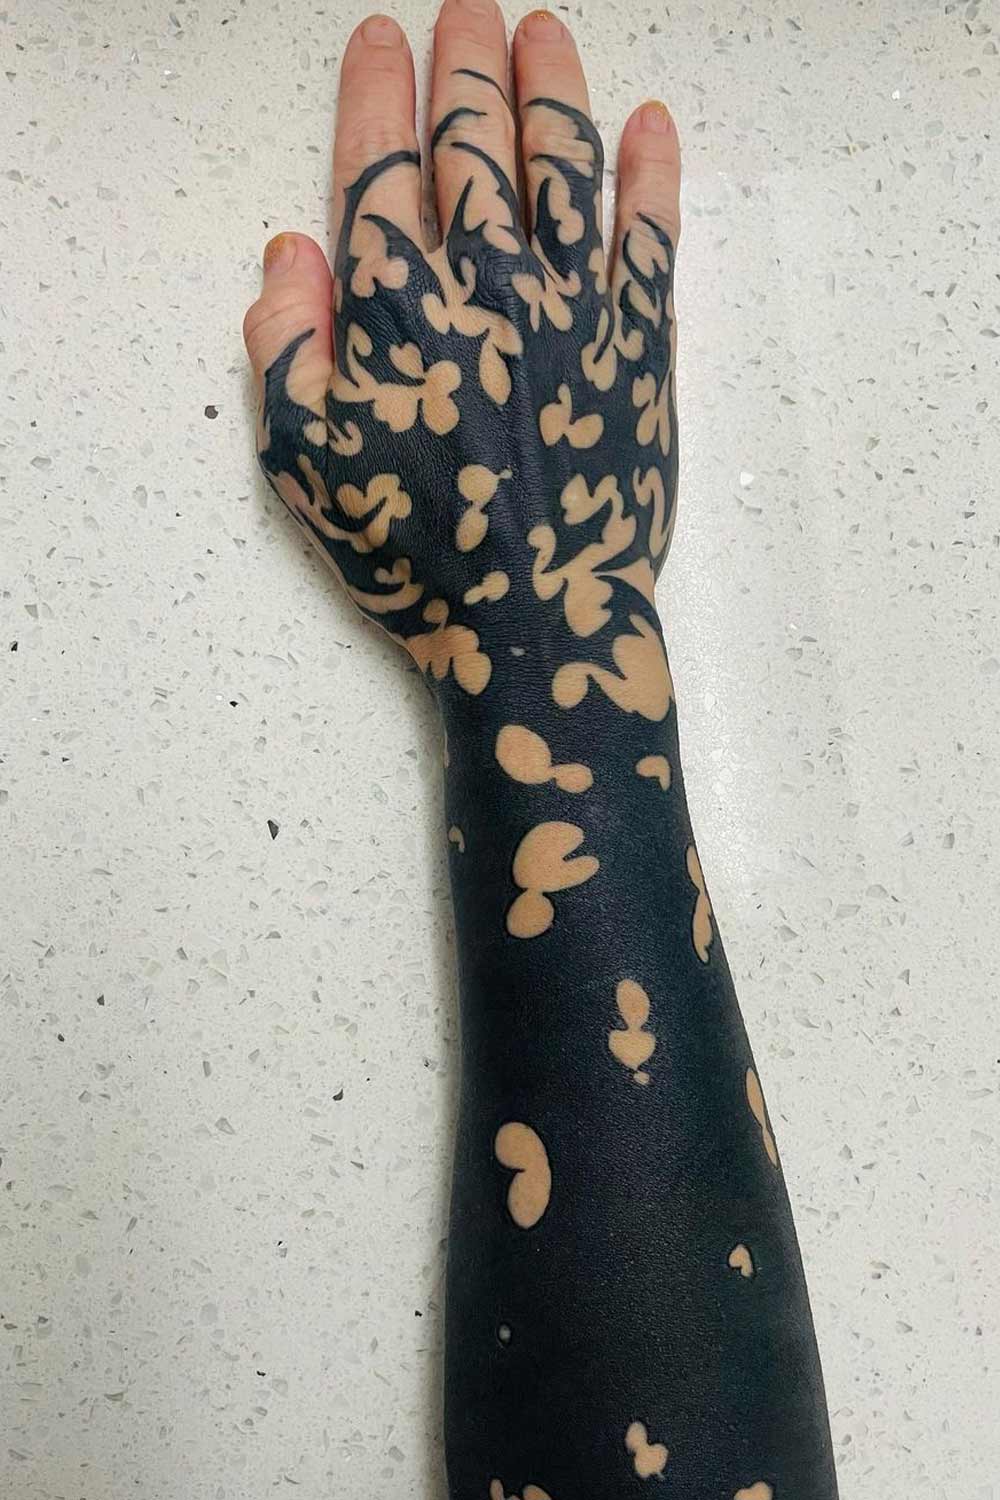 Blackout Sleeve and Hand Tattoo